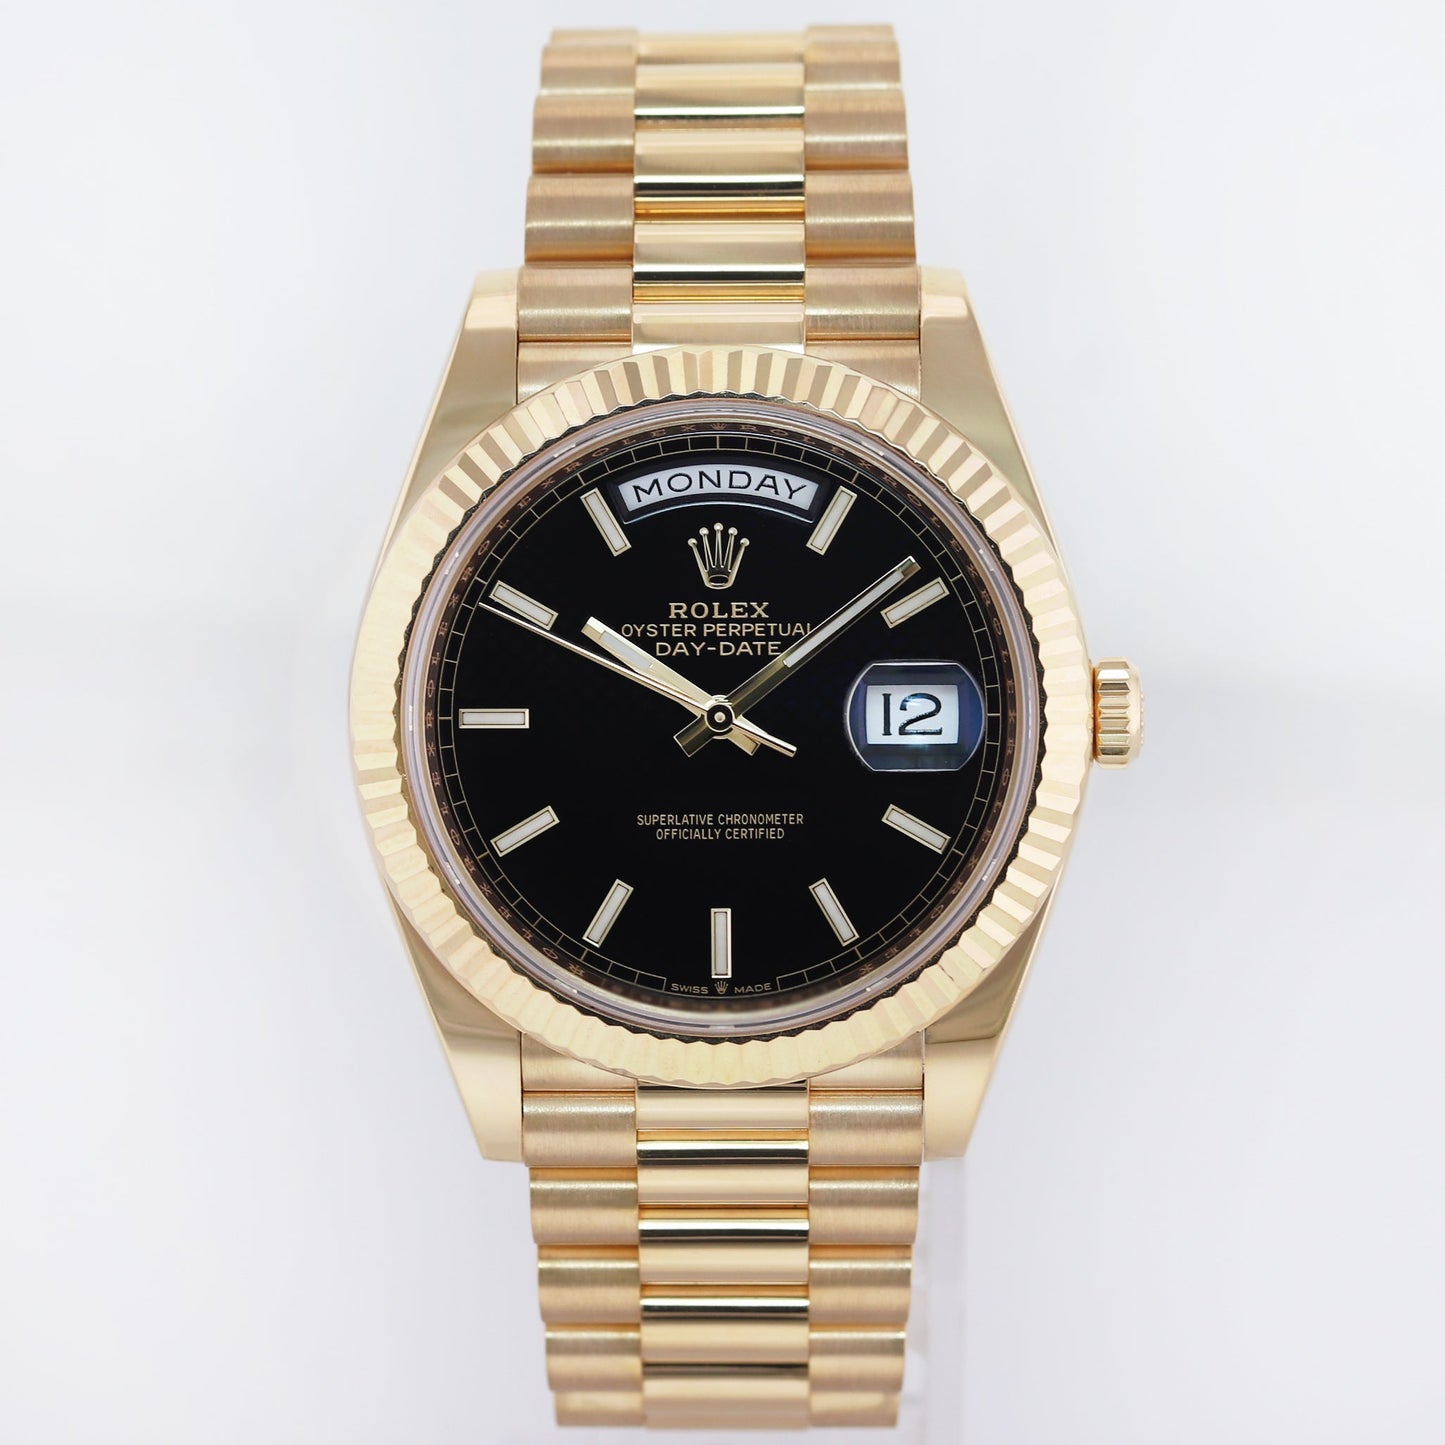 2020 Mint PAPERS Rolex Day-Date 40 President 228238 Black Stick Yellow Gold Watch